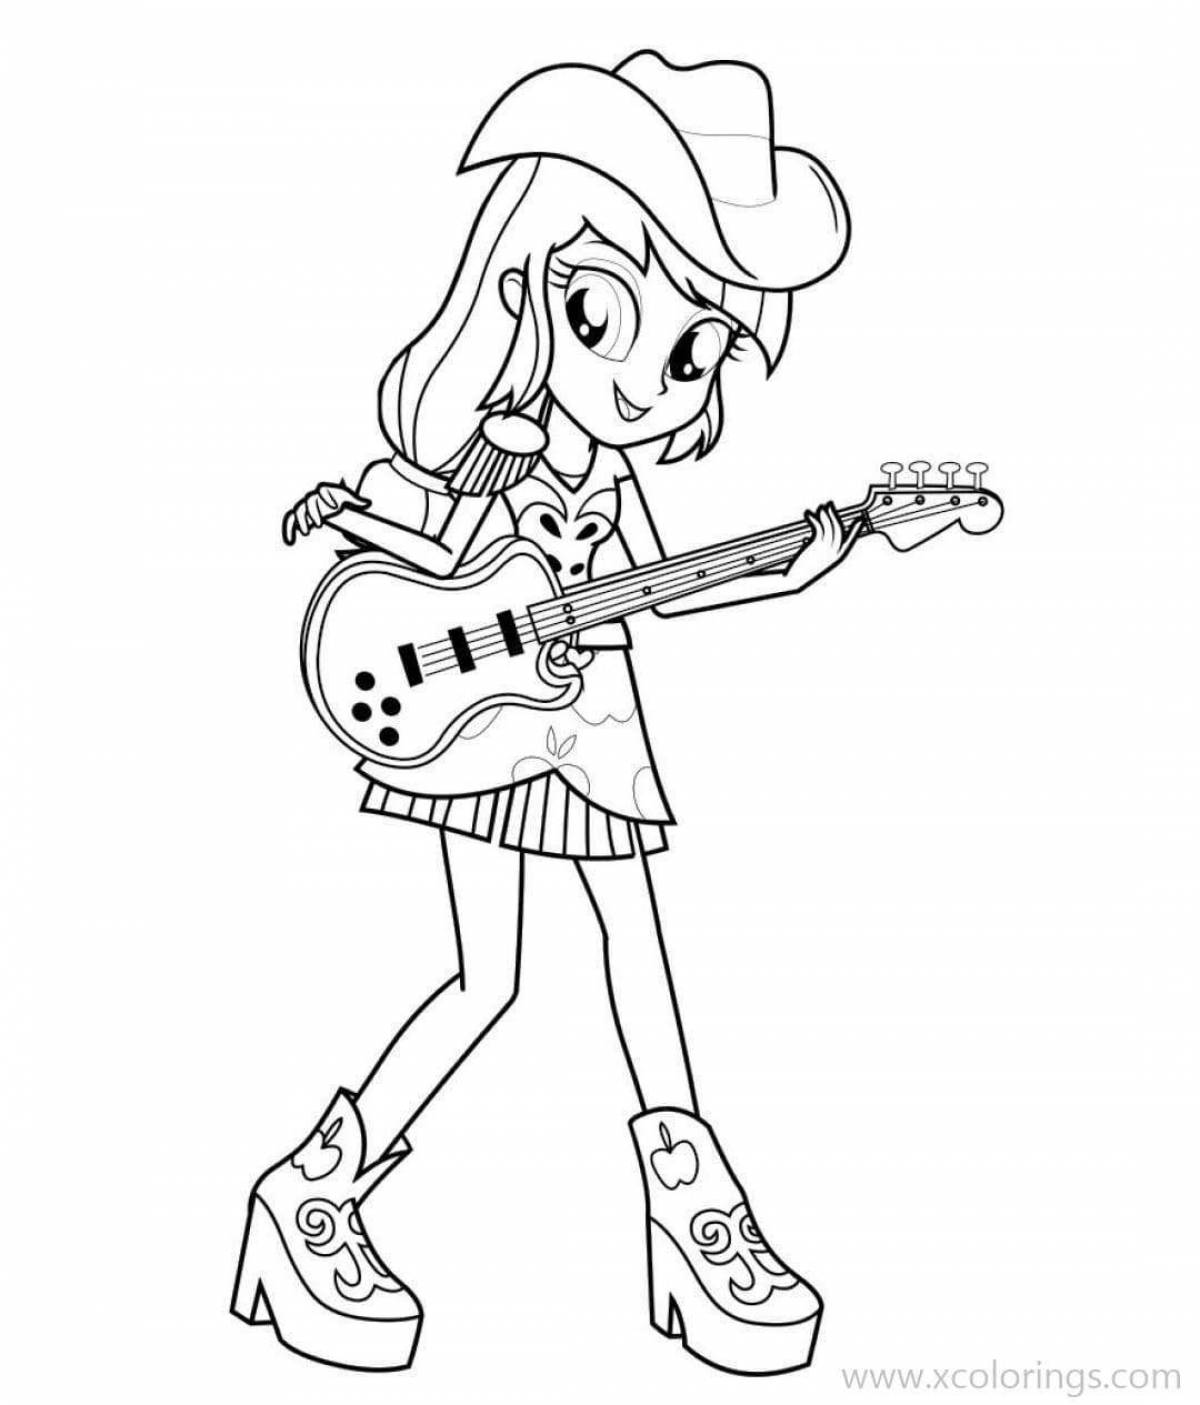 Pinkie Pie Gorgeous Equestria Girls Coloring Page